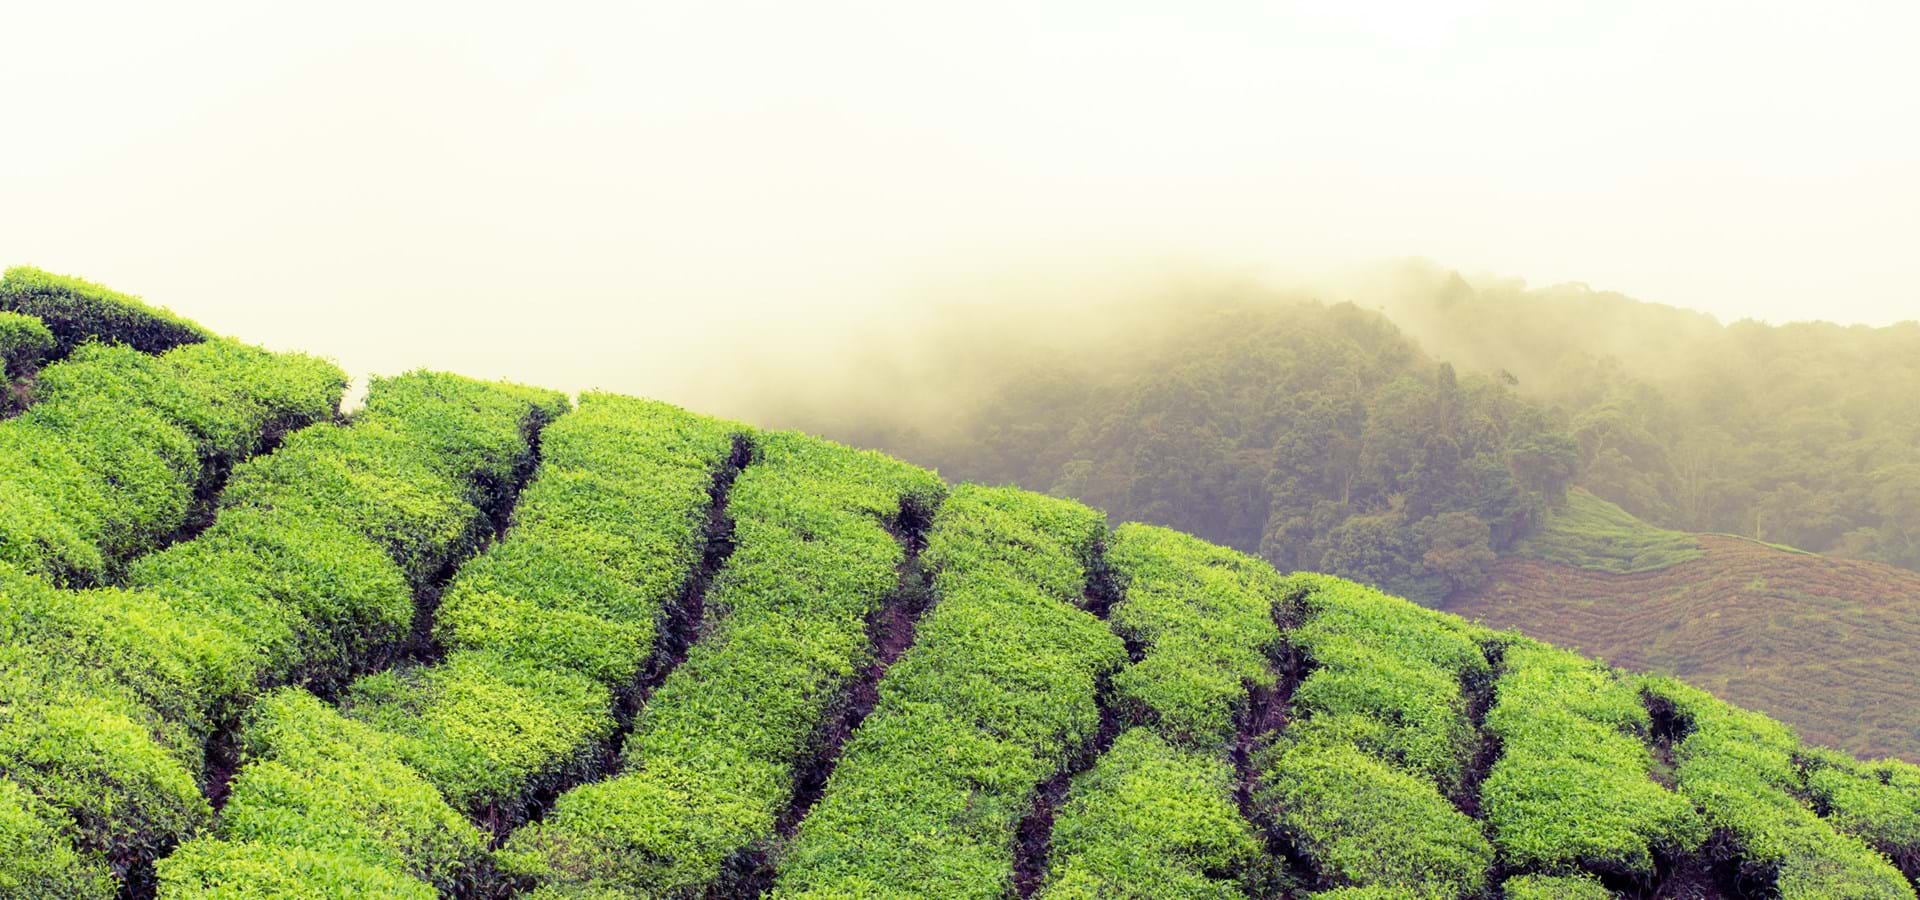 Aerial view of tea plantation with a misty sky in the background